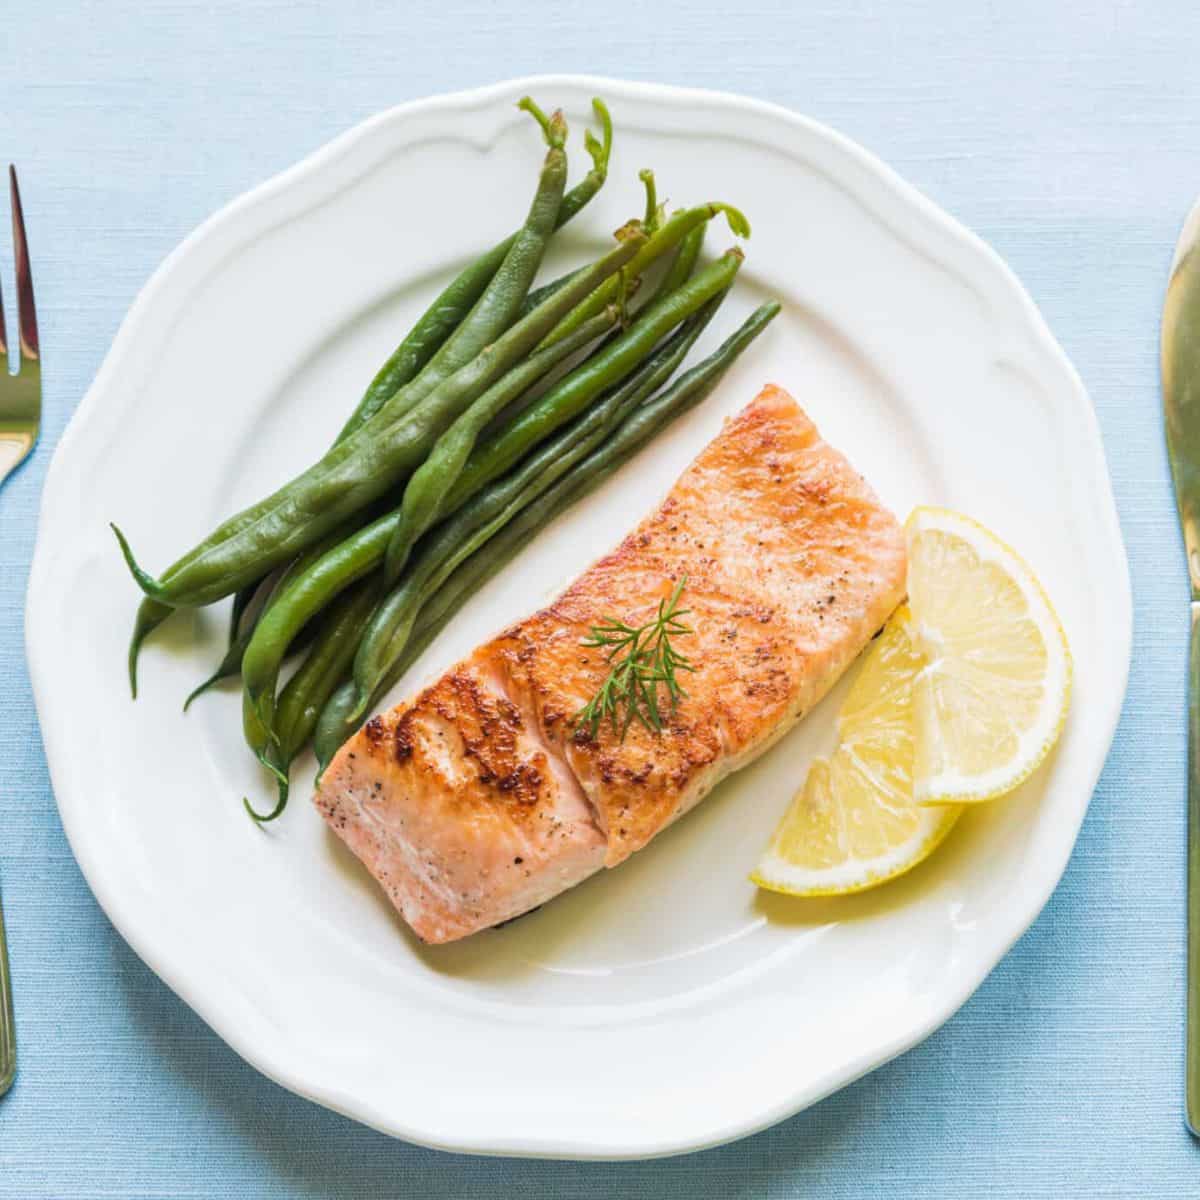 A mouthwatering dish featuring grilled salmon served on a plate with perfectly cooked green beans and a zesty touch of lemon.